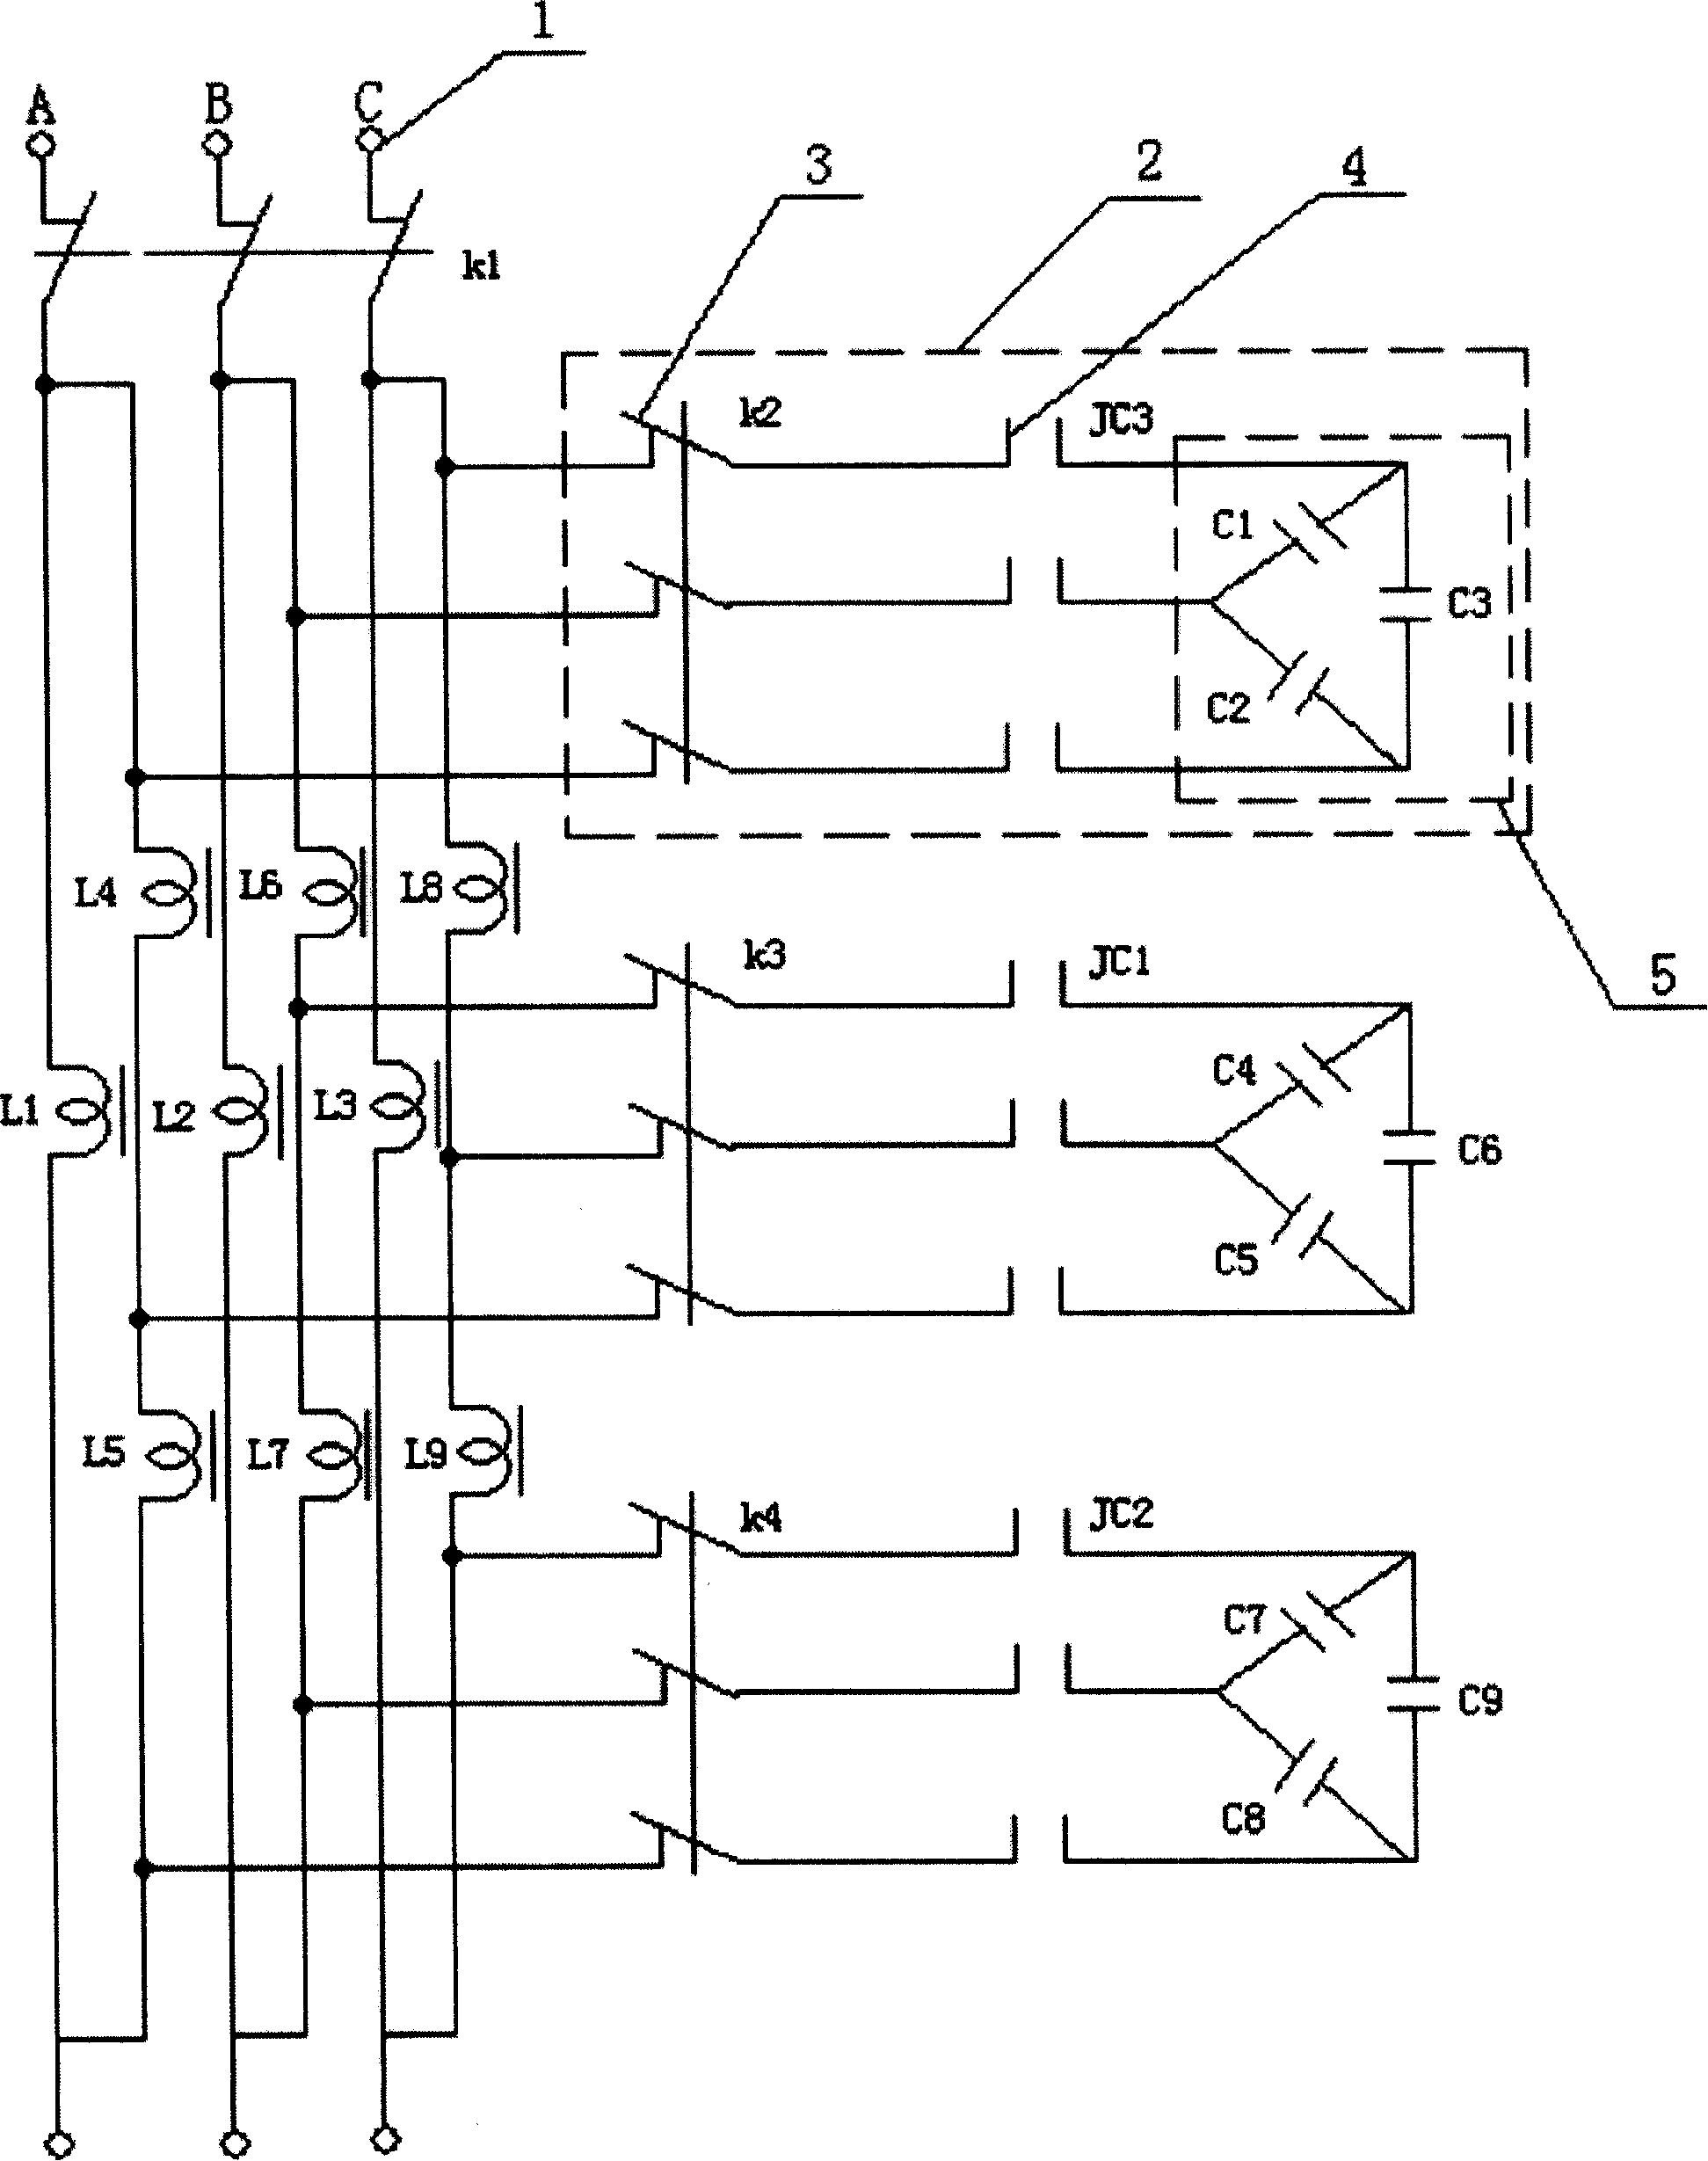 Three-phase ac electric motor electricity saver